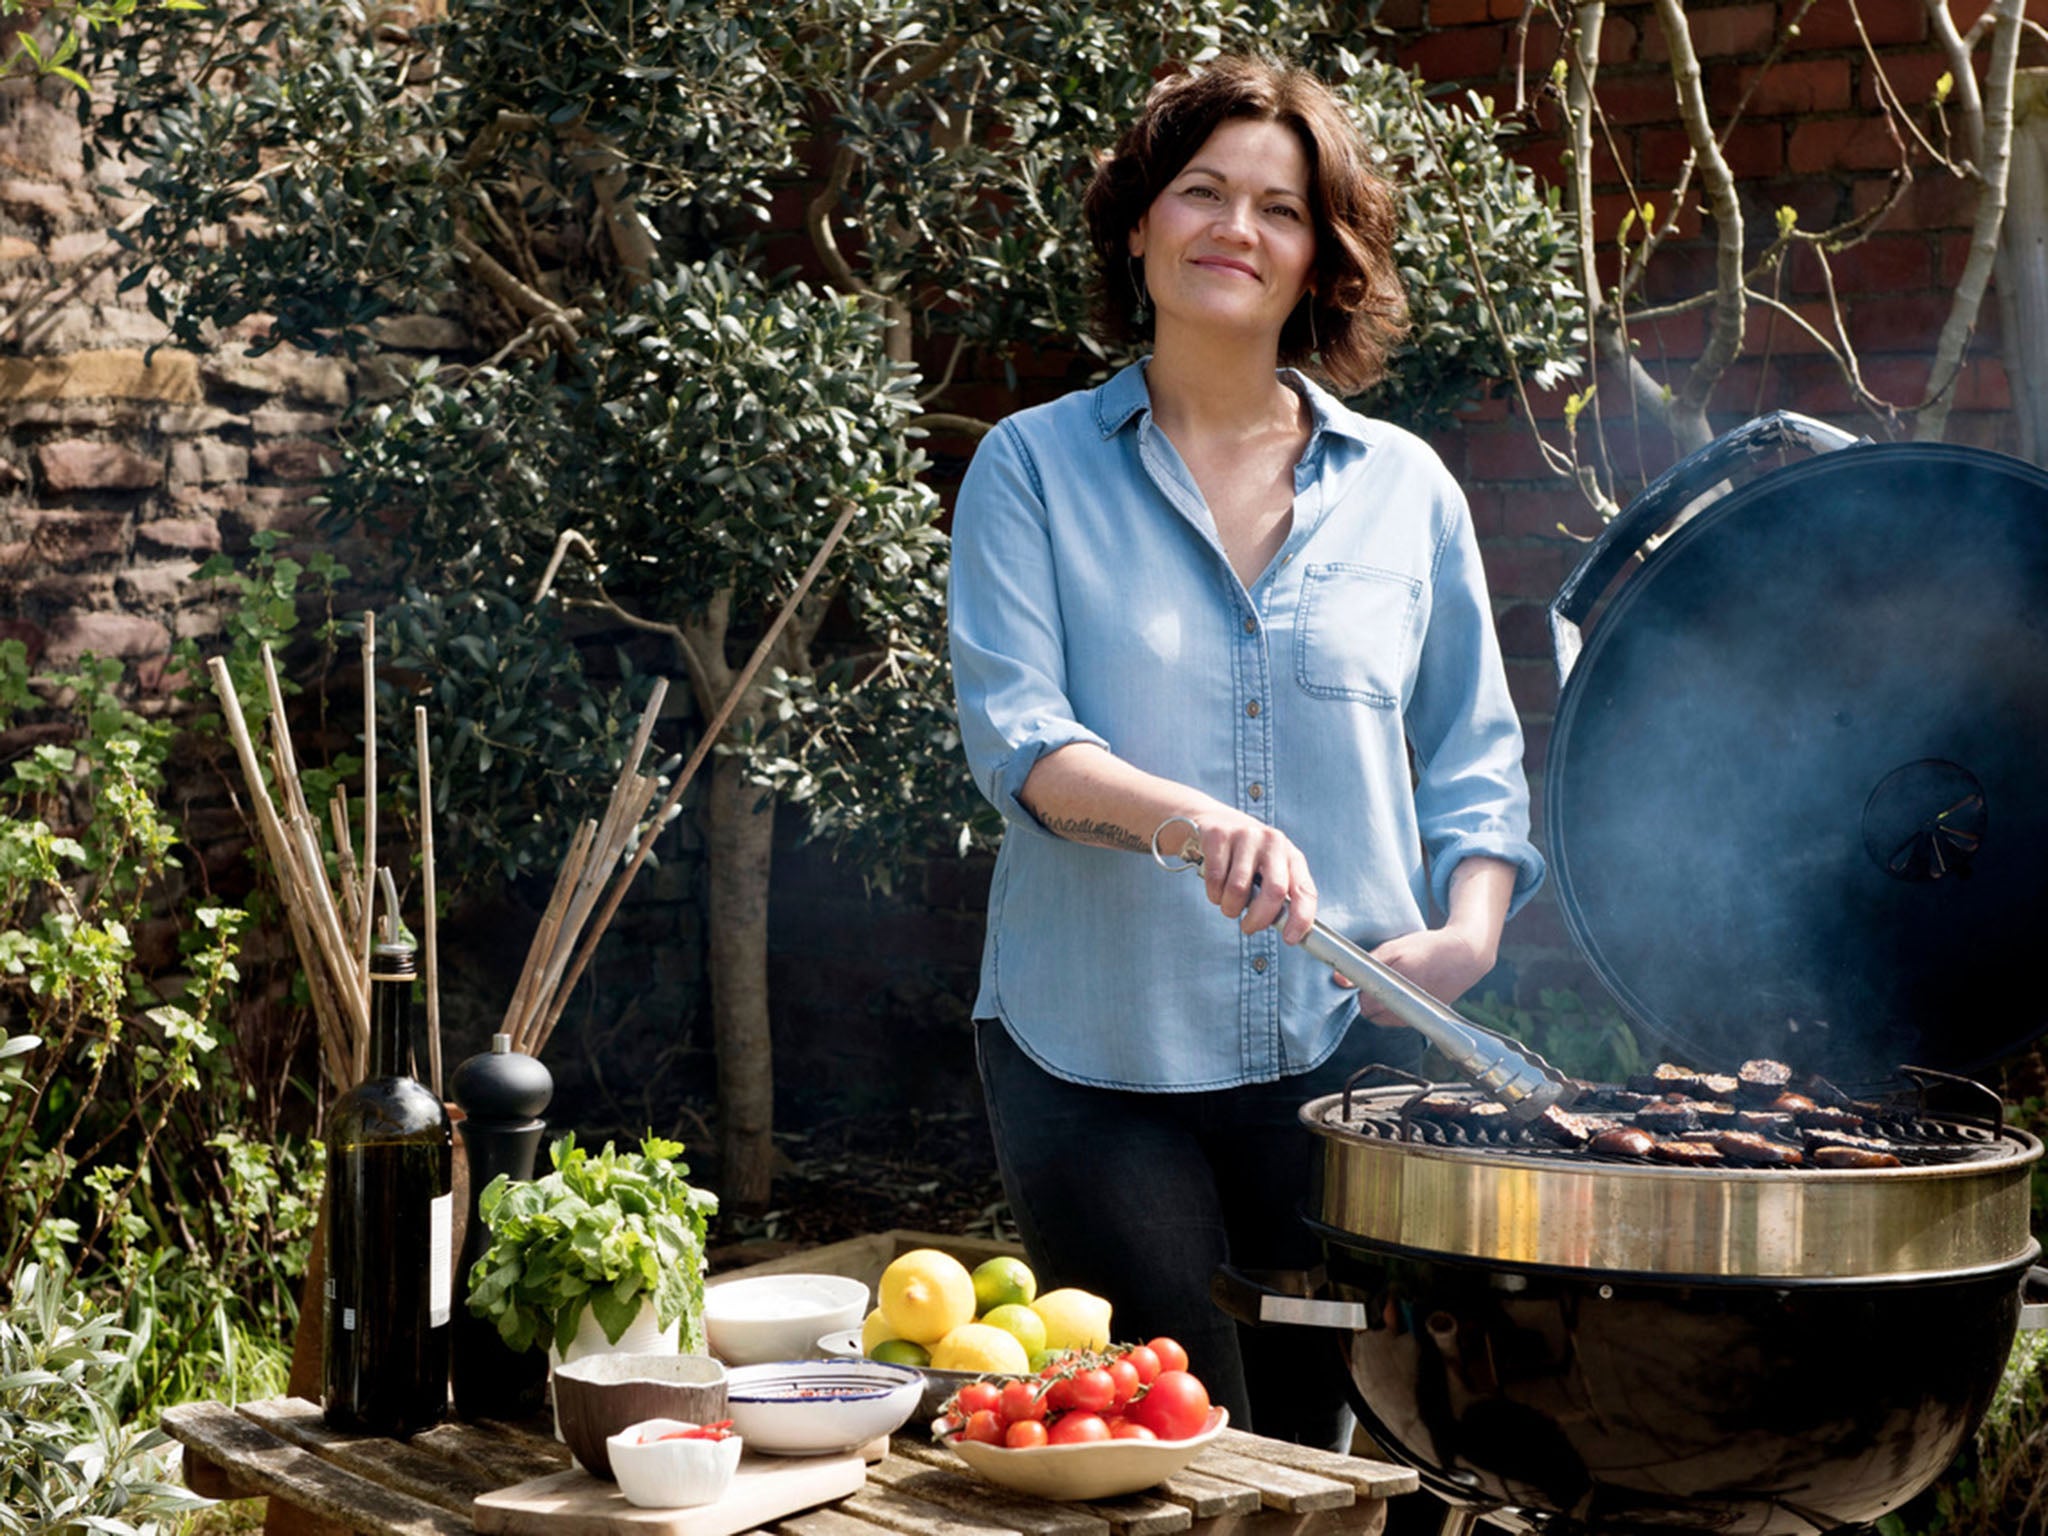 In her element: Genevieve Taylor's third book on barbecuing is free of meat